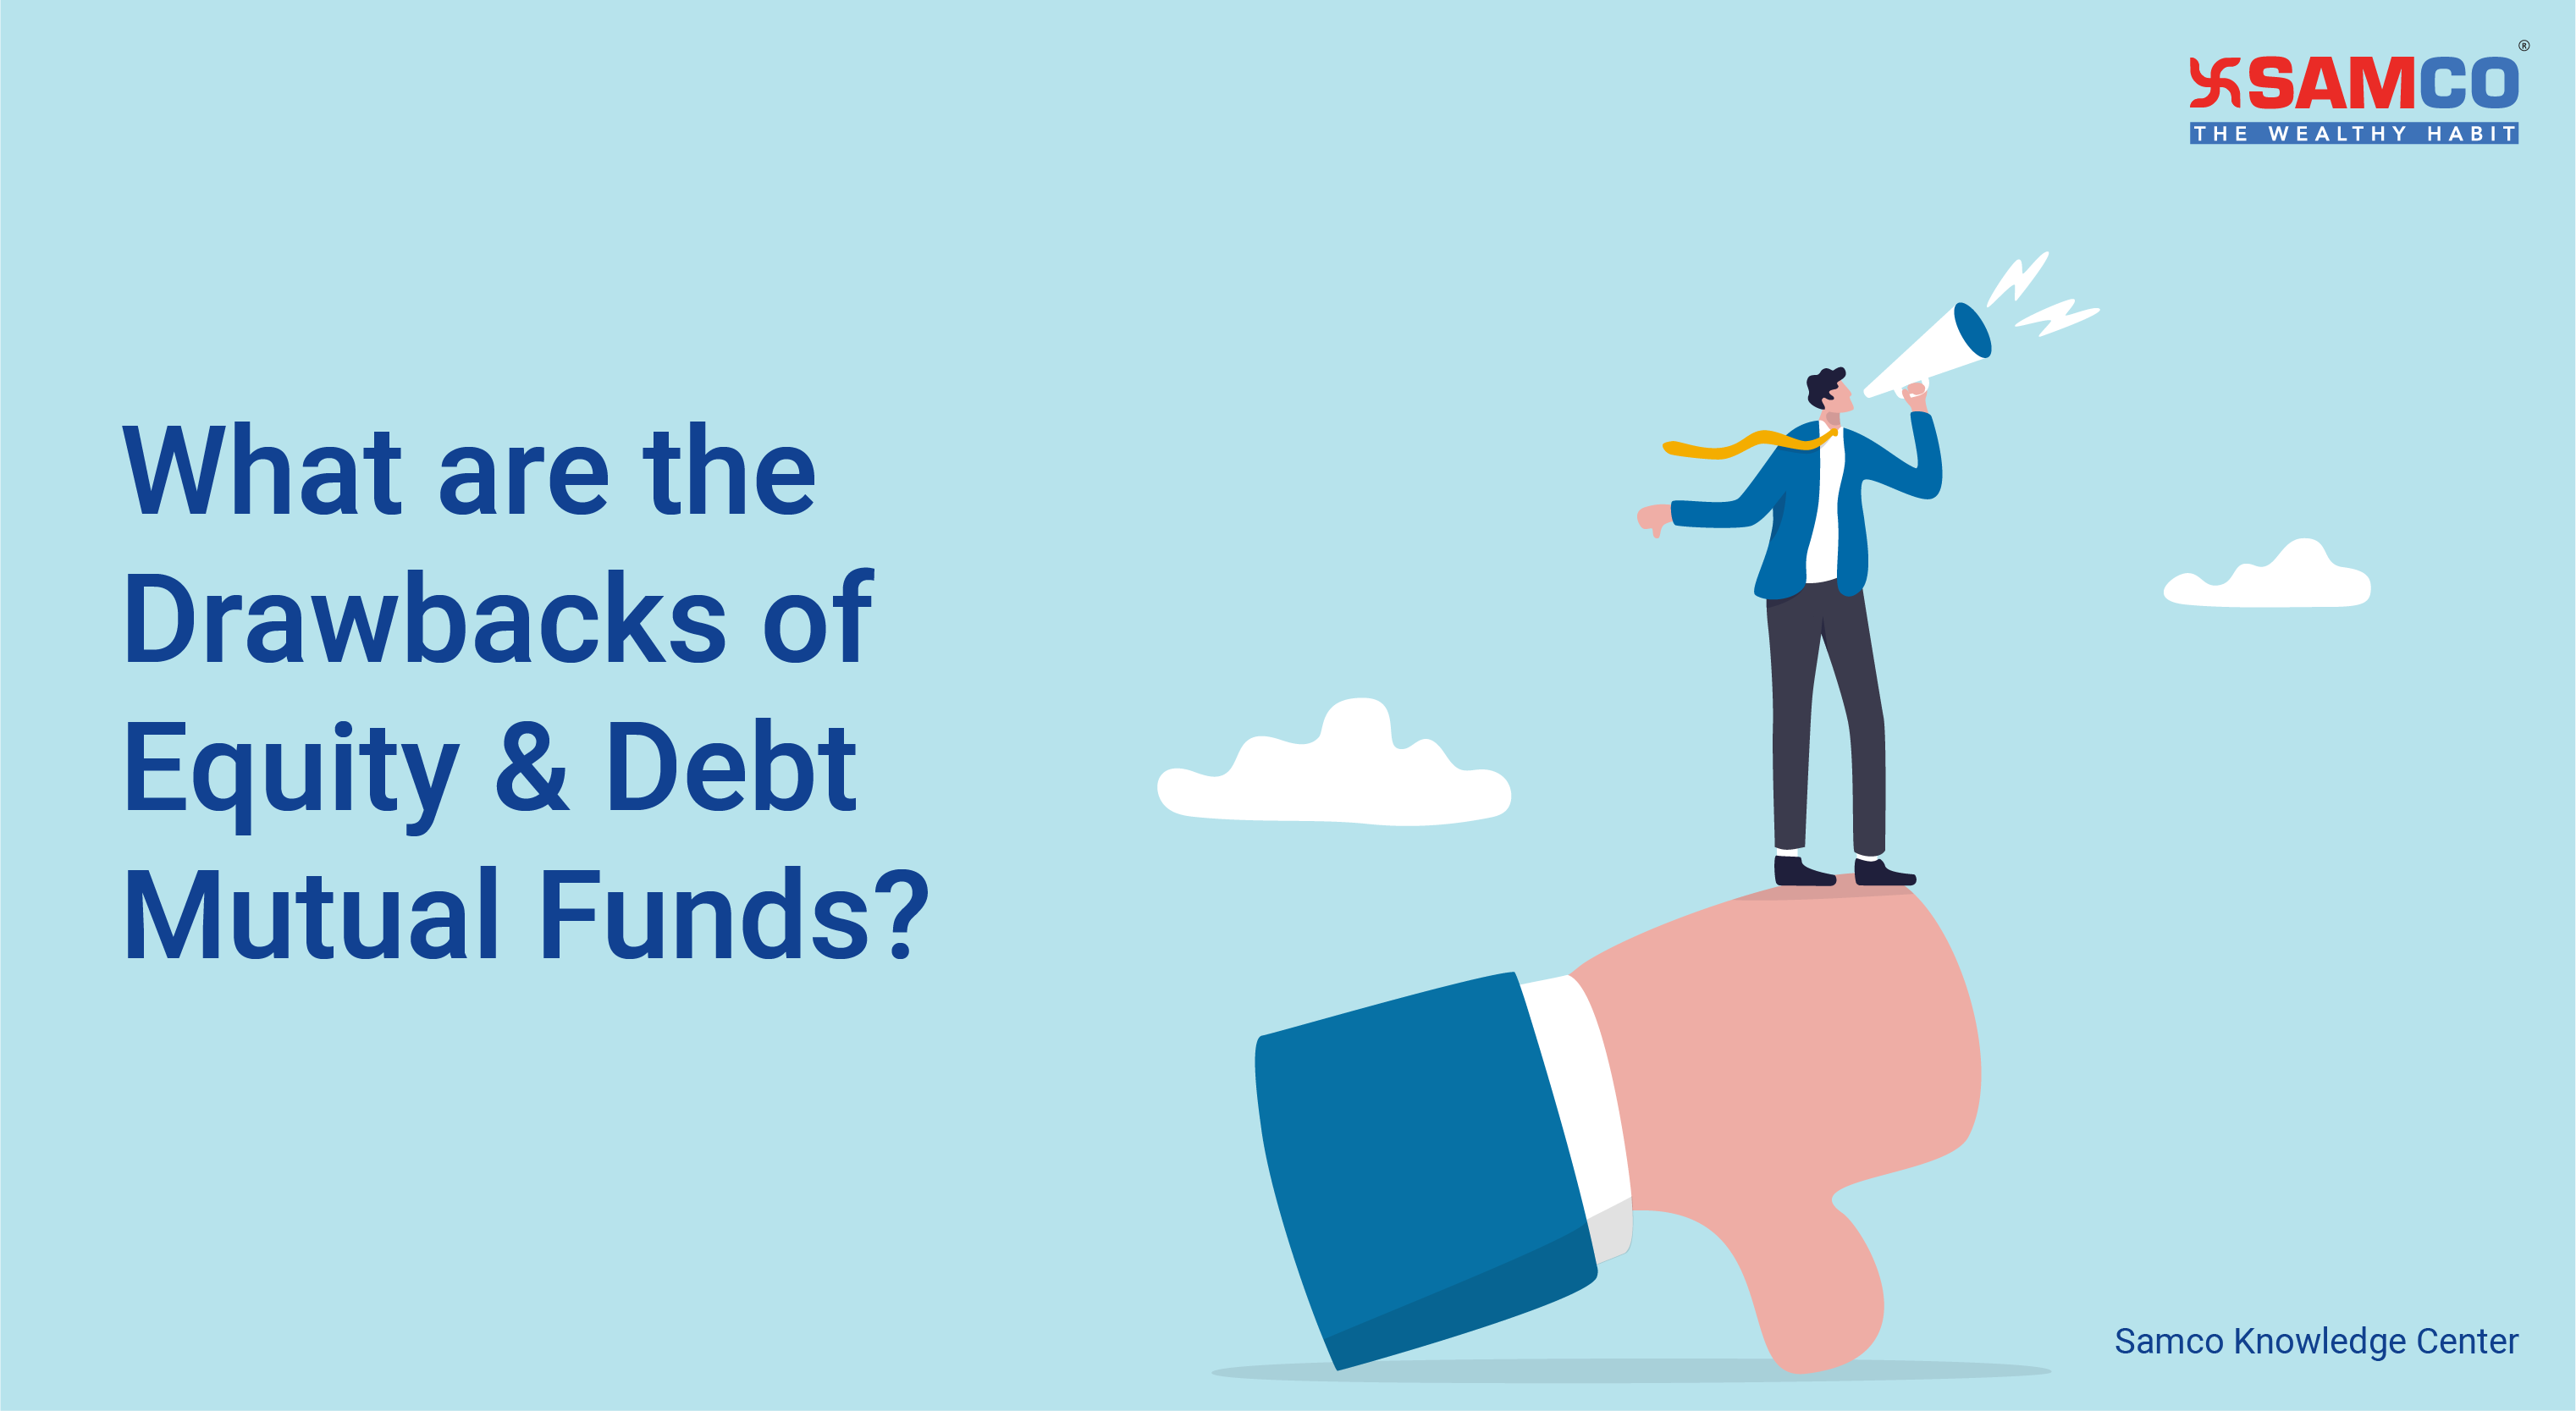 What are the Drawbacks of Equity & Debt Mutual Funds?